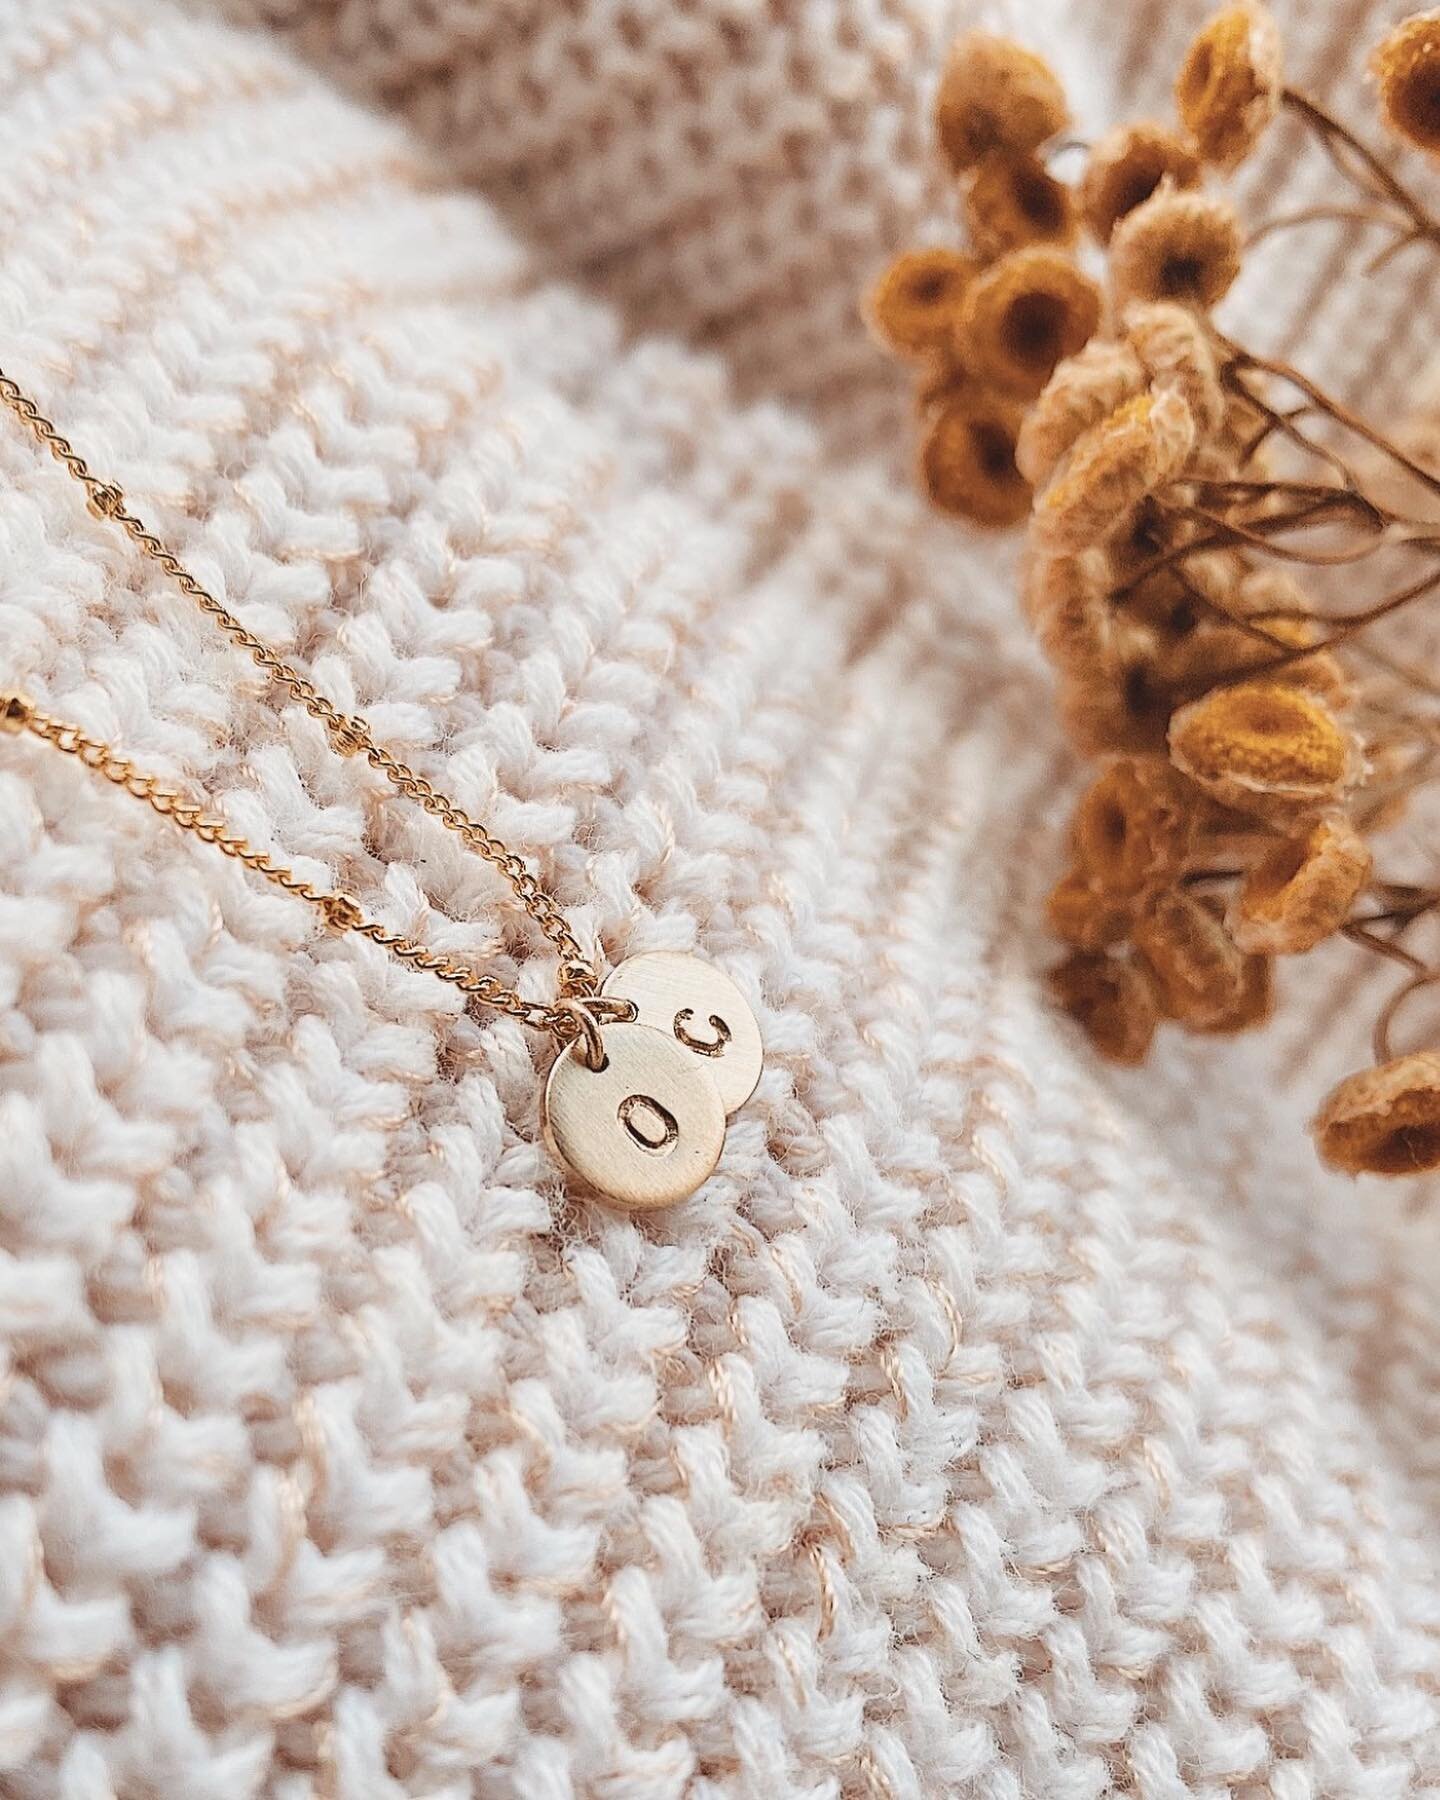 Don&rsquo;t forget this weekend is the last chance to get Mother&rsquo;s Day Orders in. 

Solid 9ct yellow gold disc necklace, a pretty and petite keepsake that holds the biggest pieces of your heart. Carry your favorite people, places, or little mem